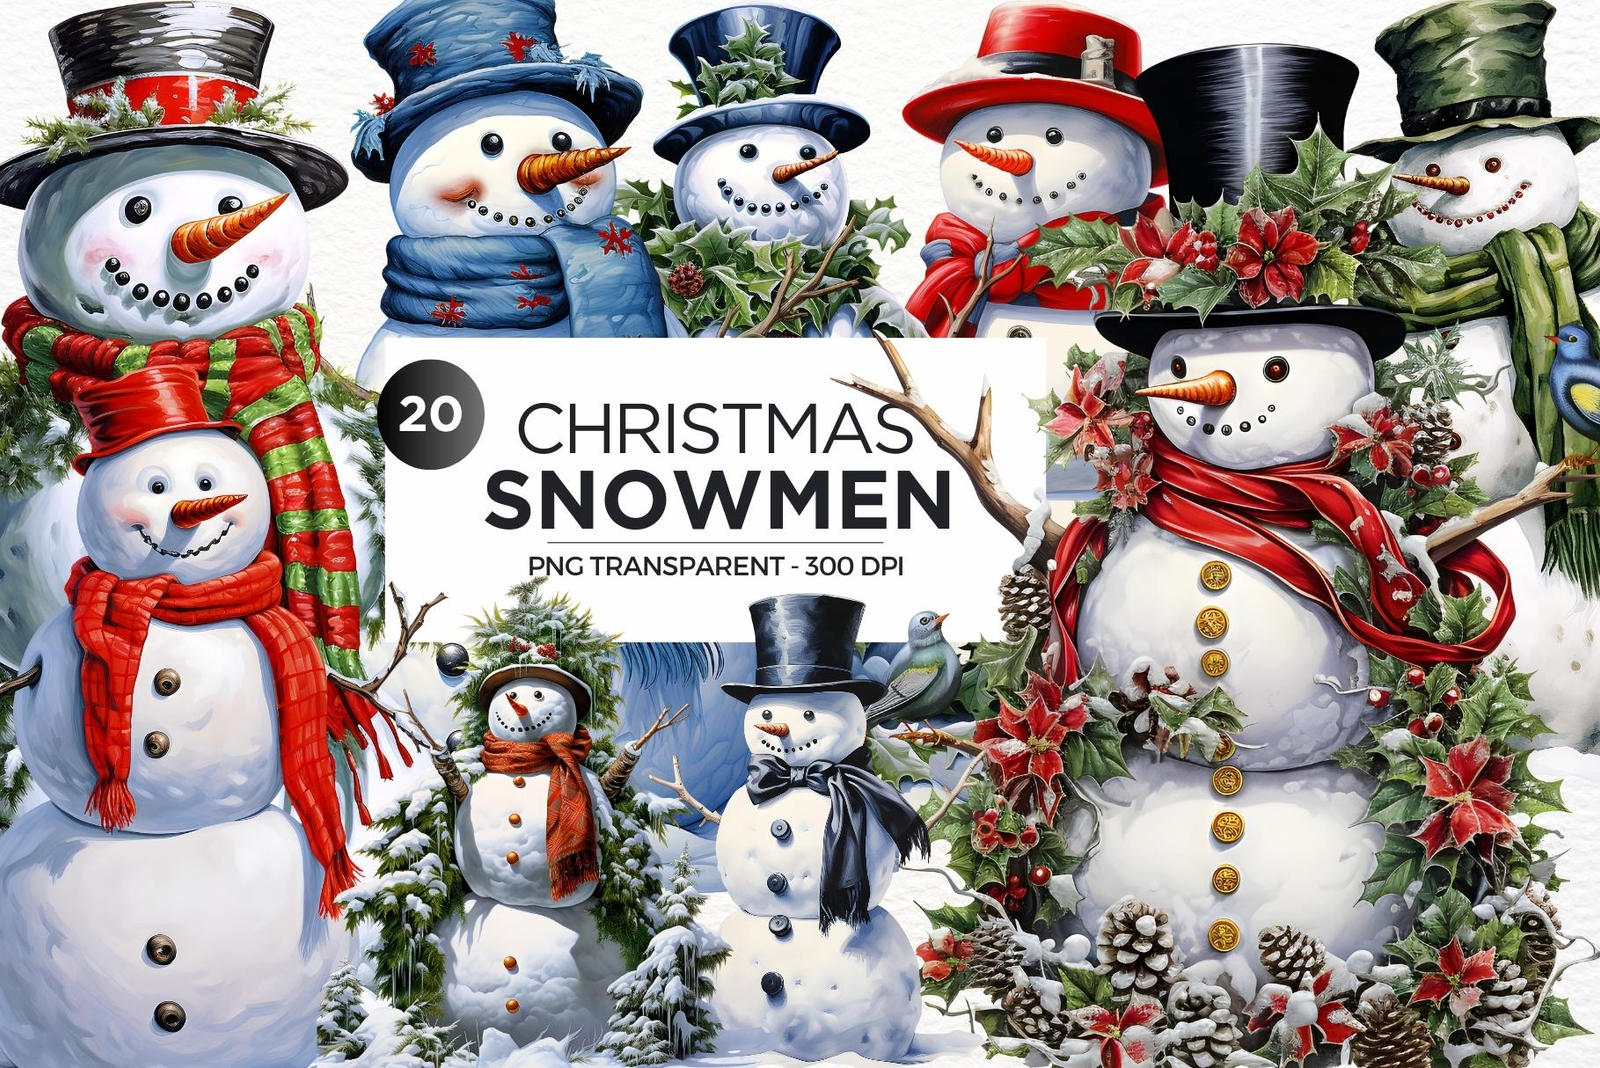 Christmas Snowman PNG clipart by Thats-Design on DeviantArt